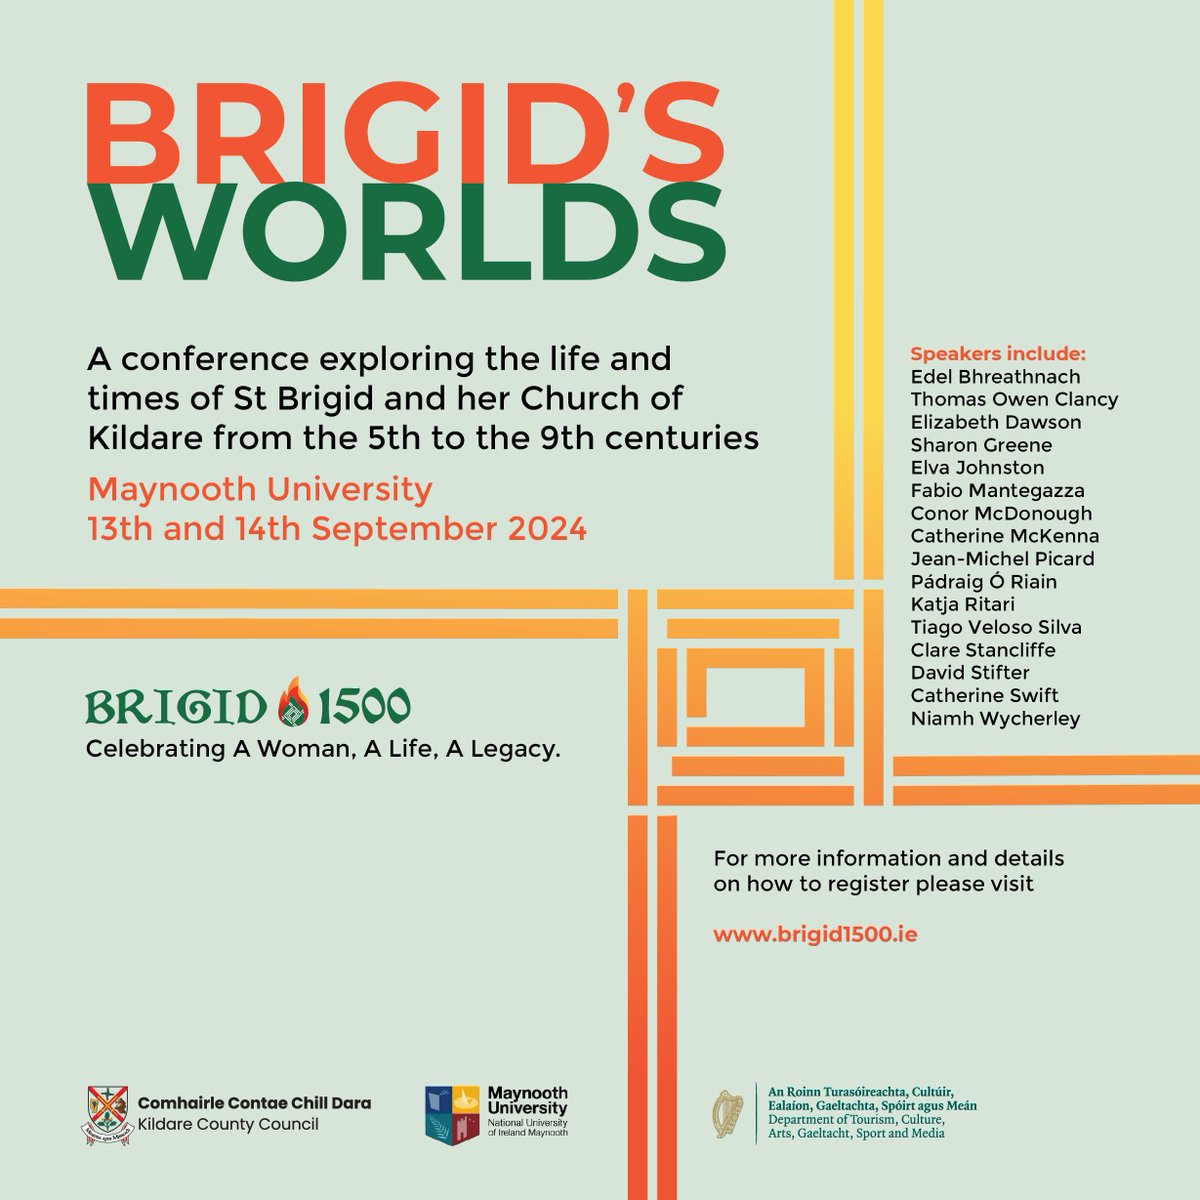 Save the date! The stunning weather in Maynooth today has me looking ahead to welcoming you all to campus Sept 13th & 14th for the Brigid's Worlds conference — a collab of @MaynoothUni @EarlyIrishMU & @KildareCoCo @brigid1500. More details to follow. email niamh.wycherley@mu.ie